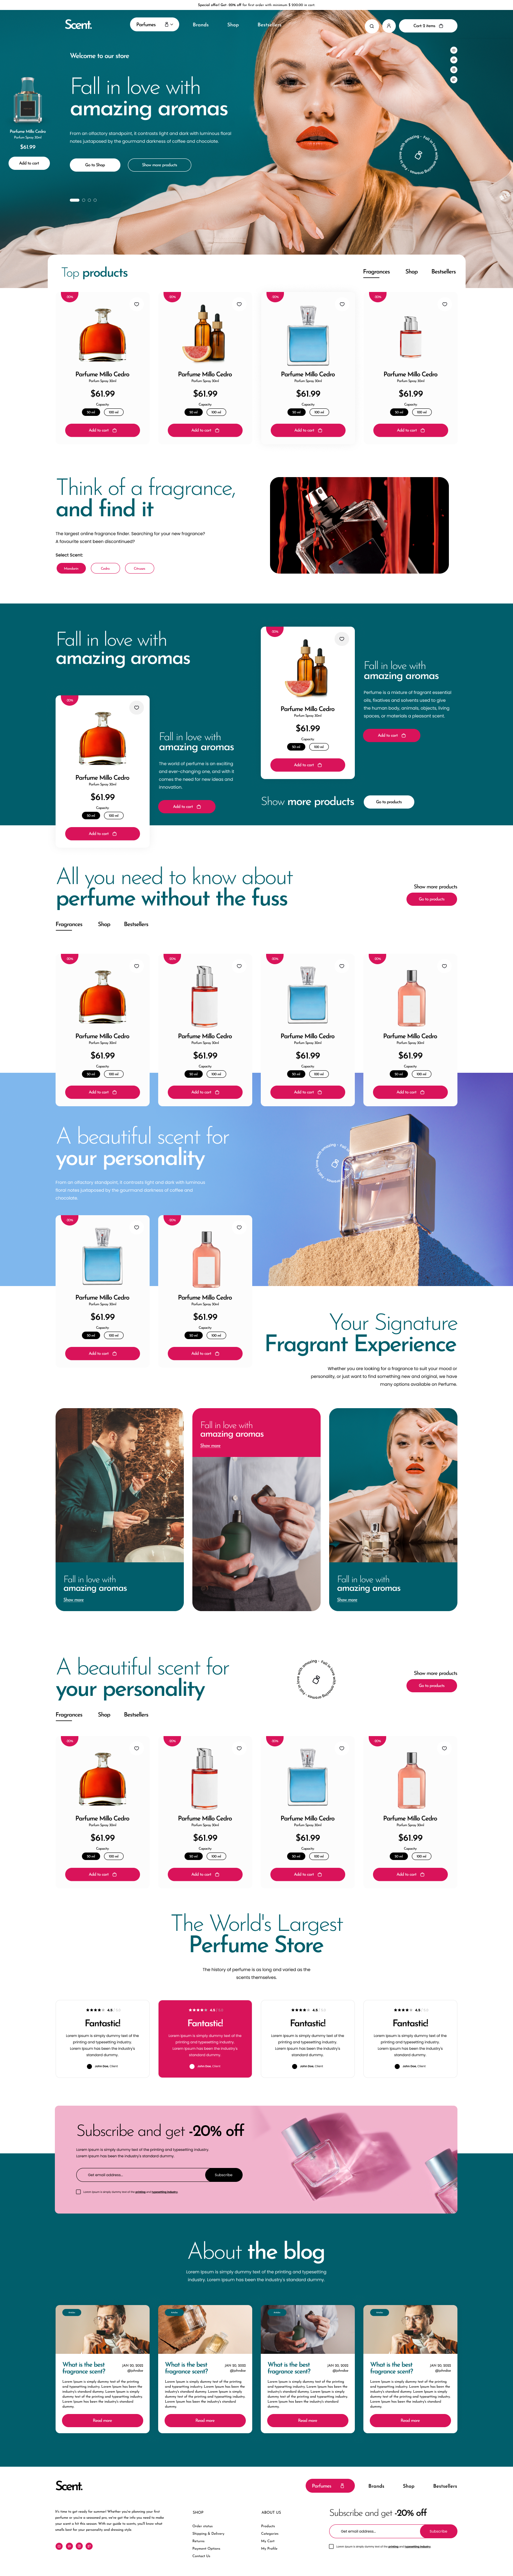 Scent – Mobile Apps for eCommerceGo SaaS